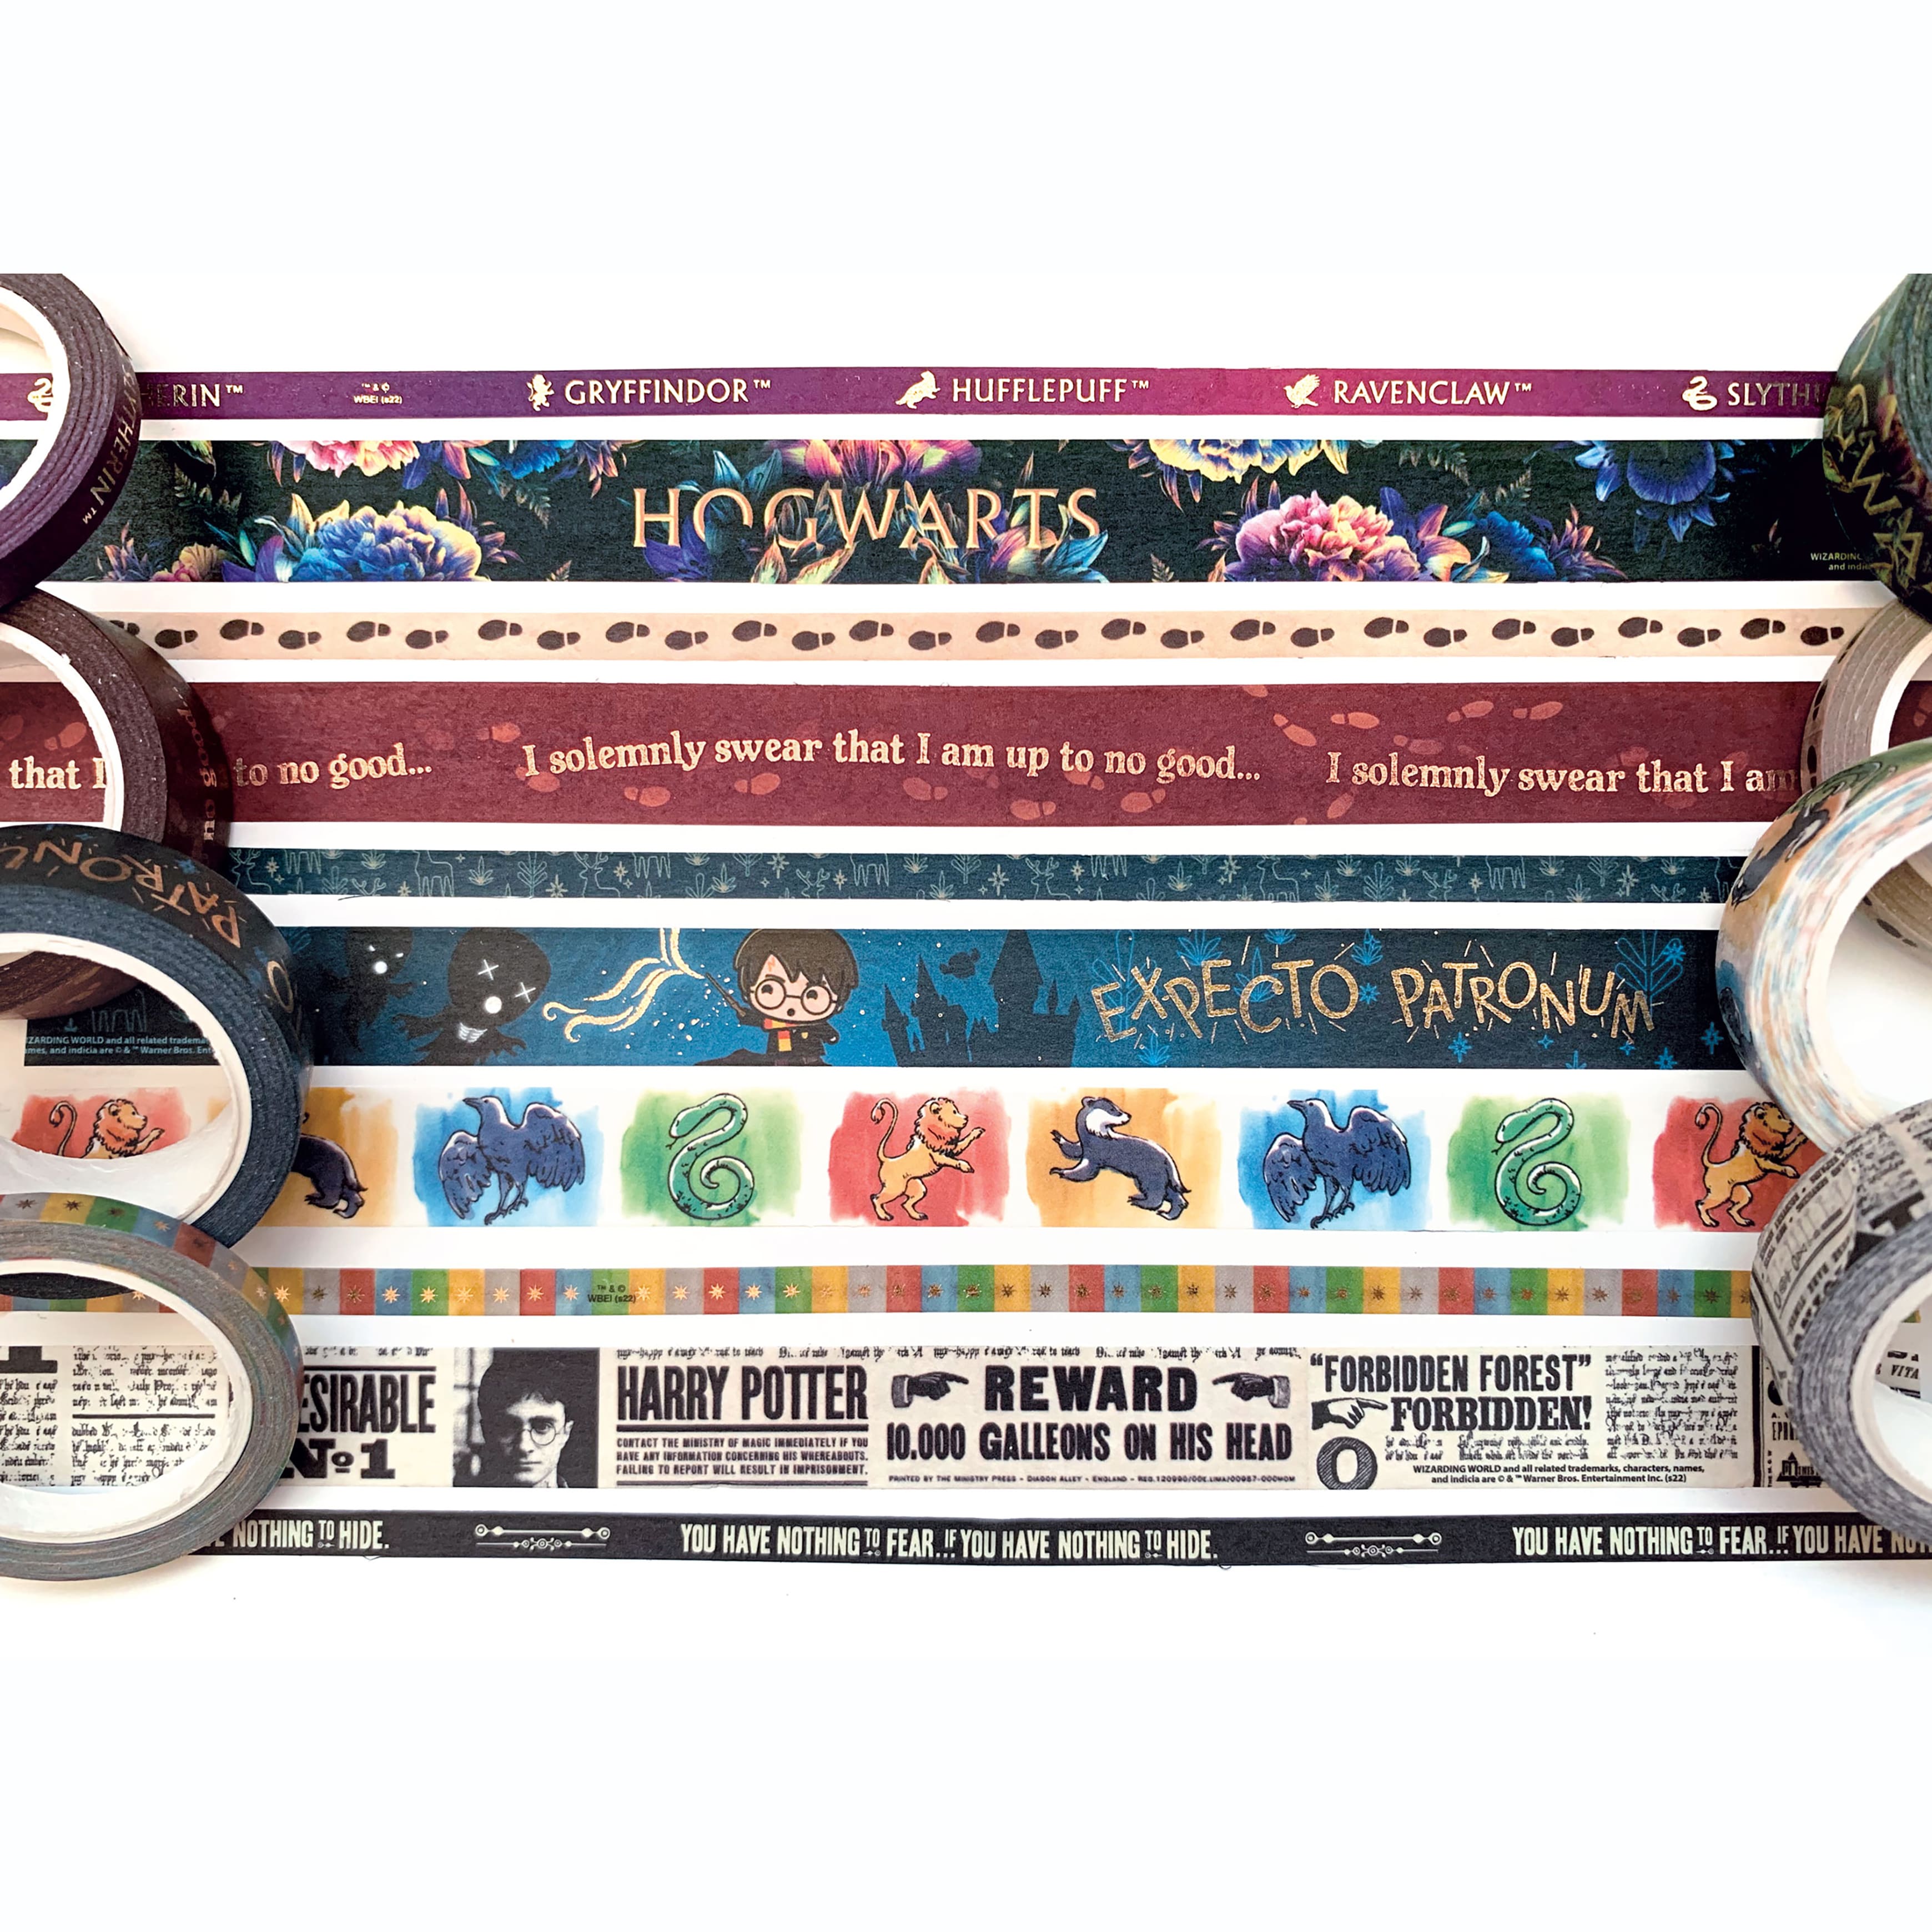 Paper House STWA0048 Harry Potter Quidditch Washi Tape